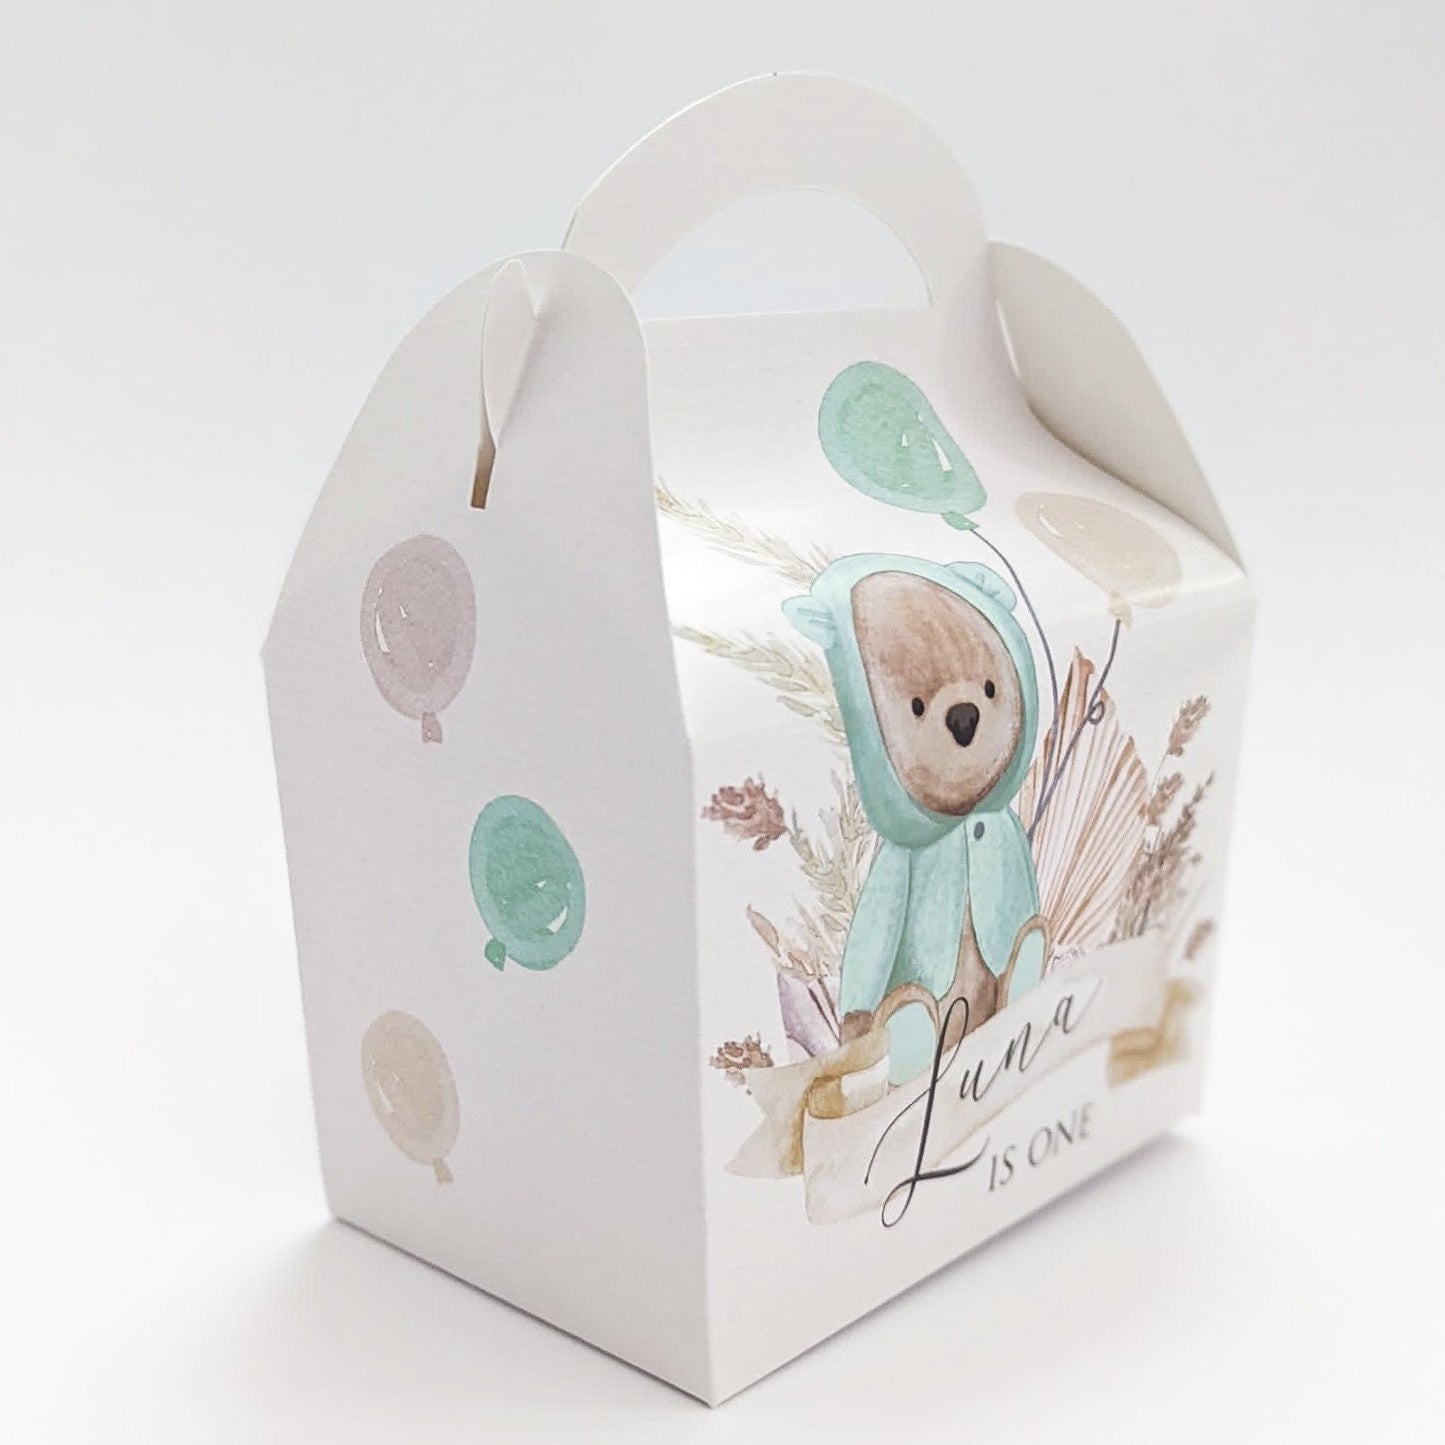 Watercolour Neutral Boho Teddy Bears and Balloons Personalised Children’s Party Box Gift Bag Favour